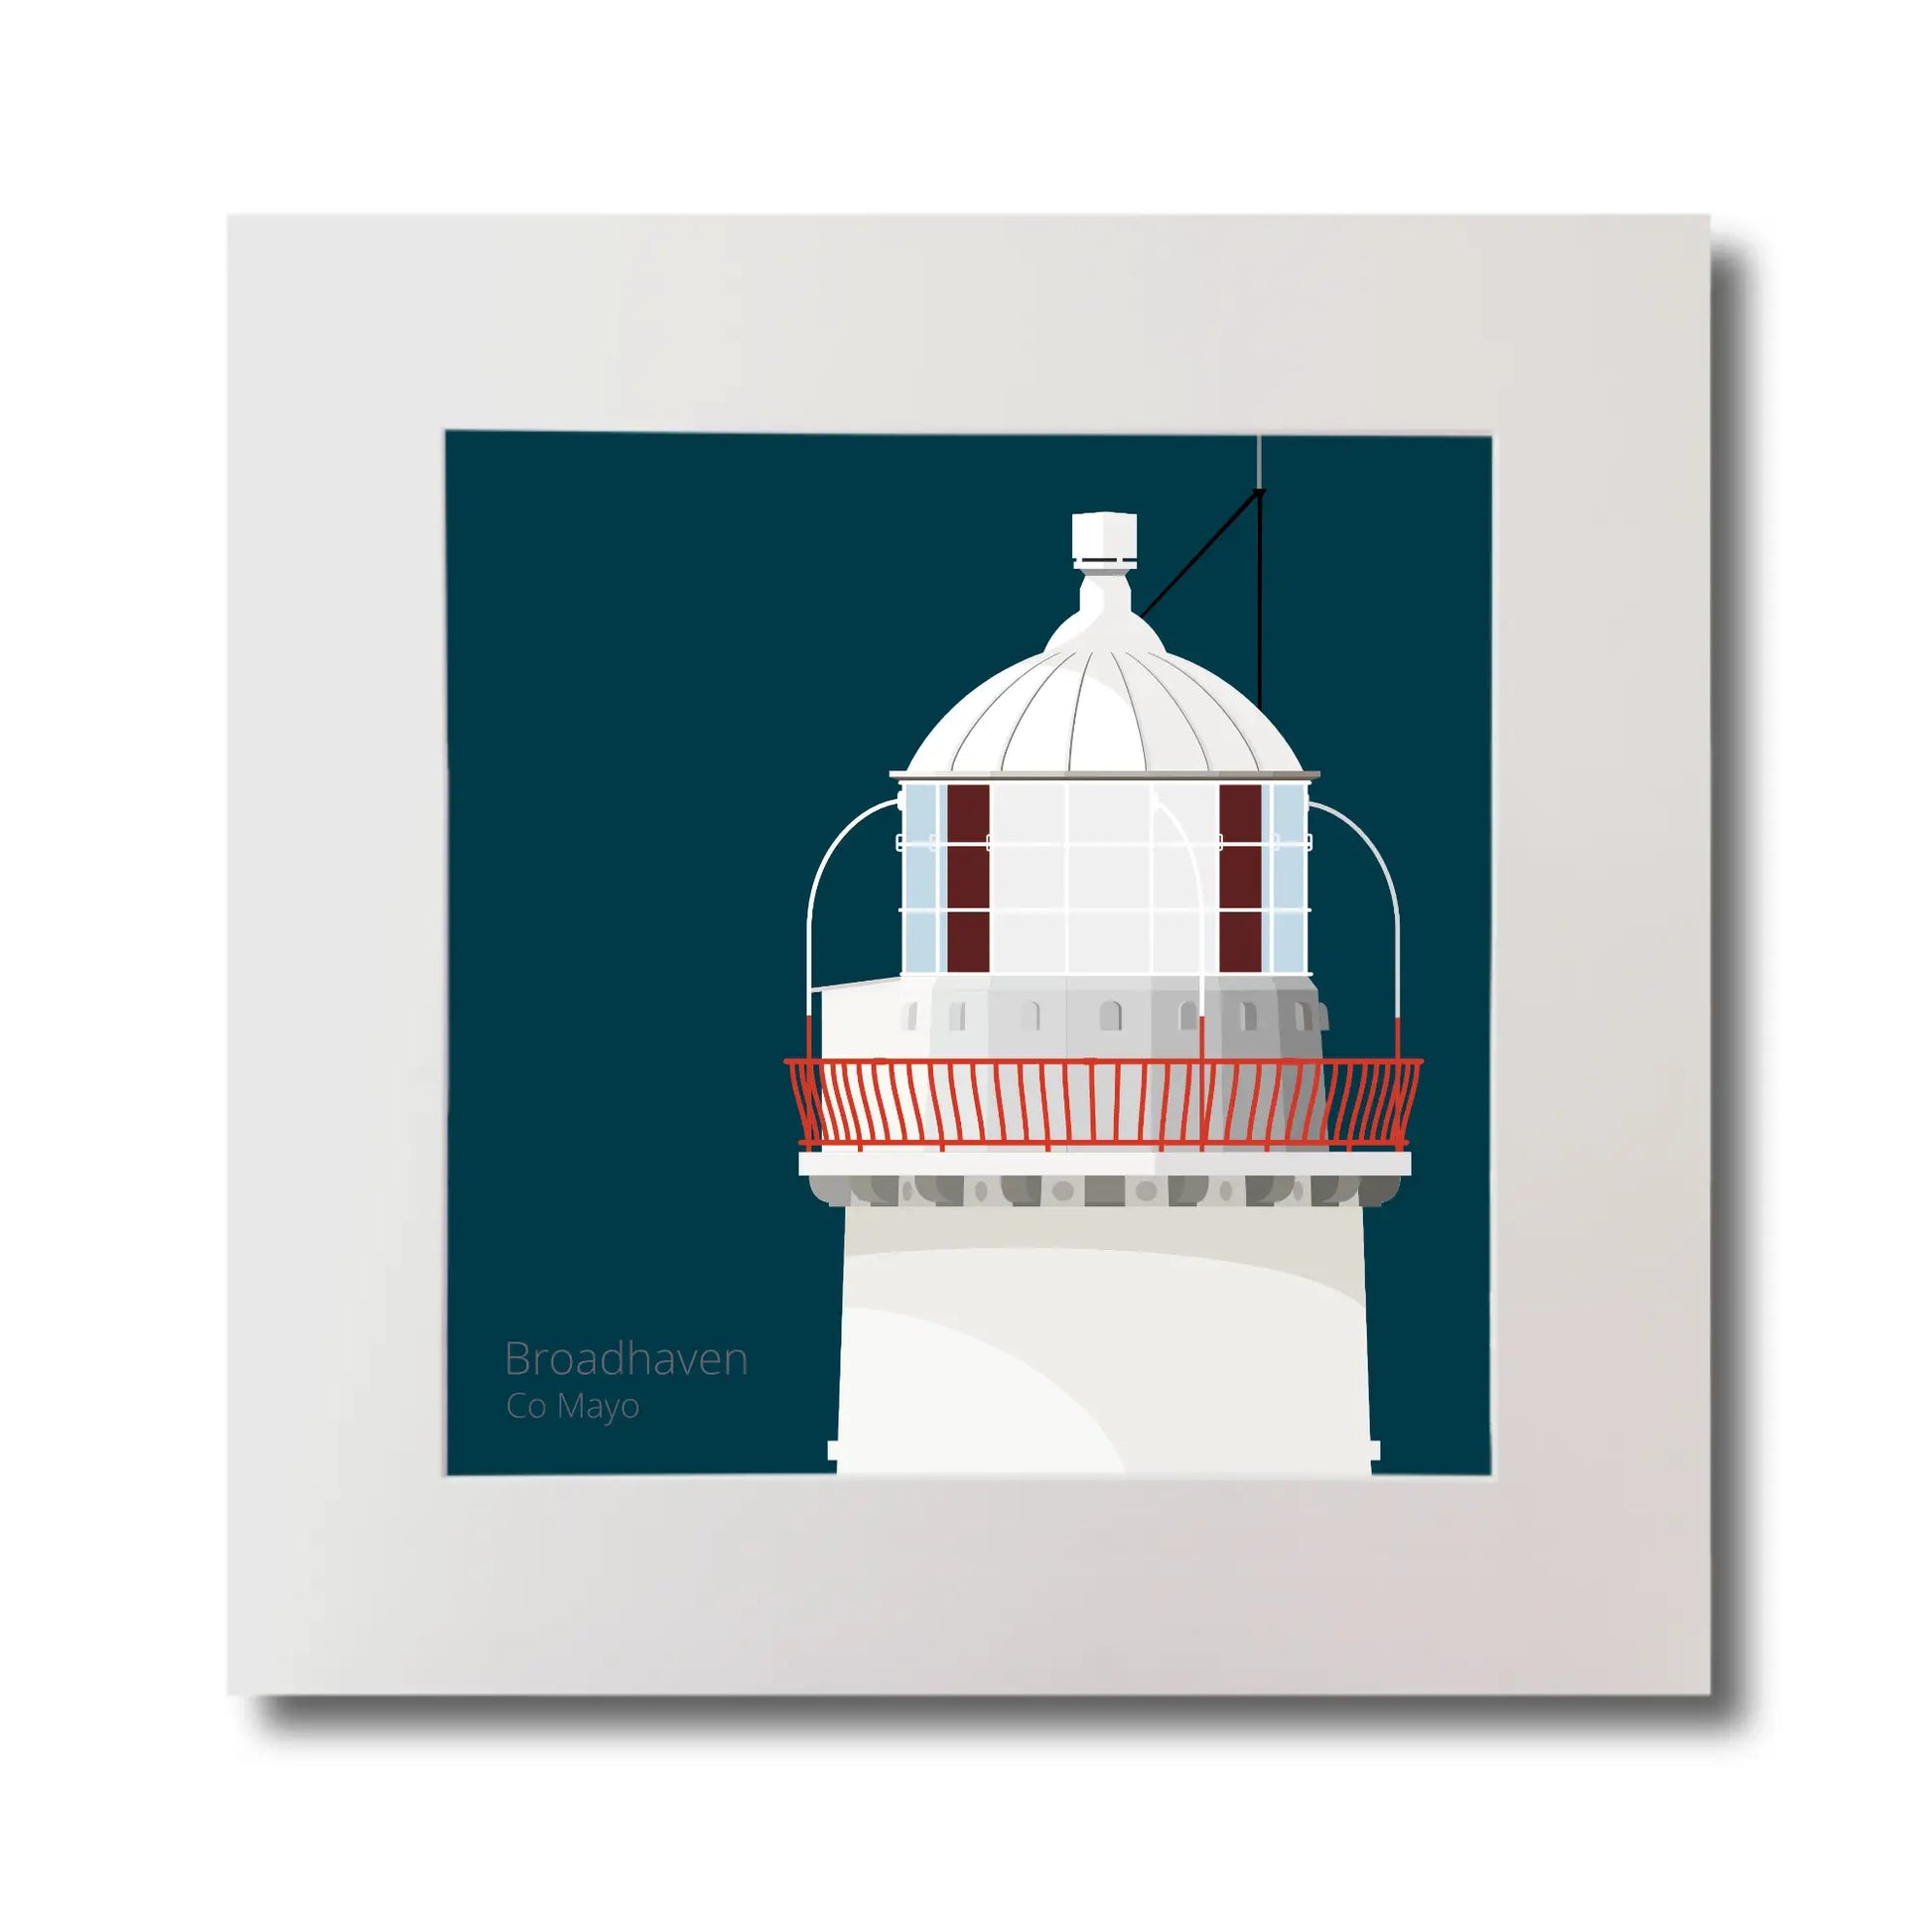 Illustration of Broadhaven lighthouse on a midnight blue background, mounted and measuring 30x30cm.